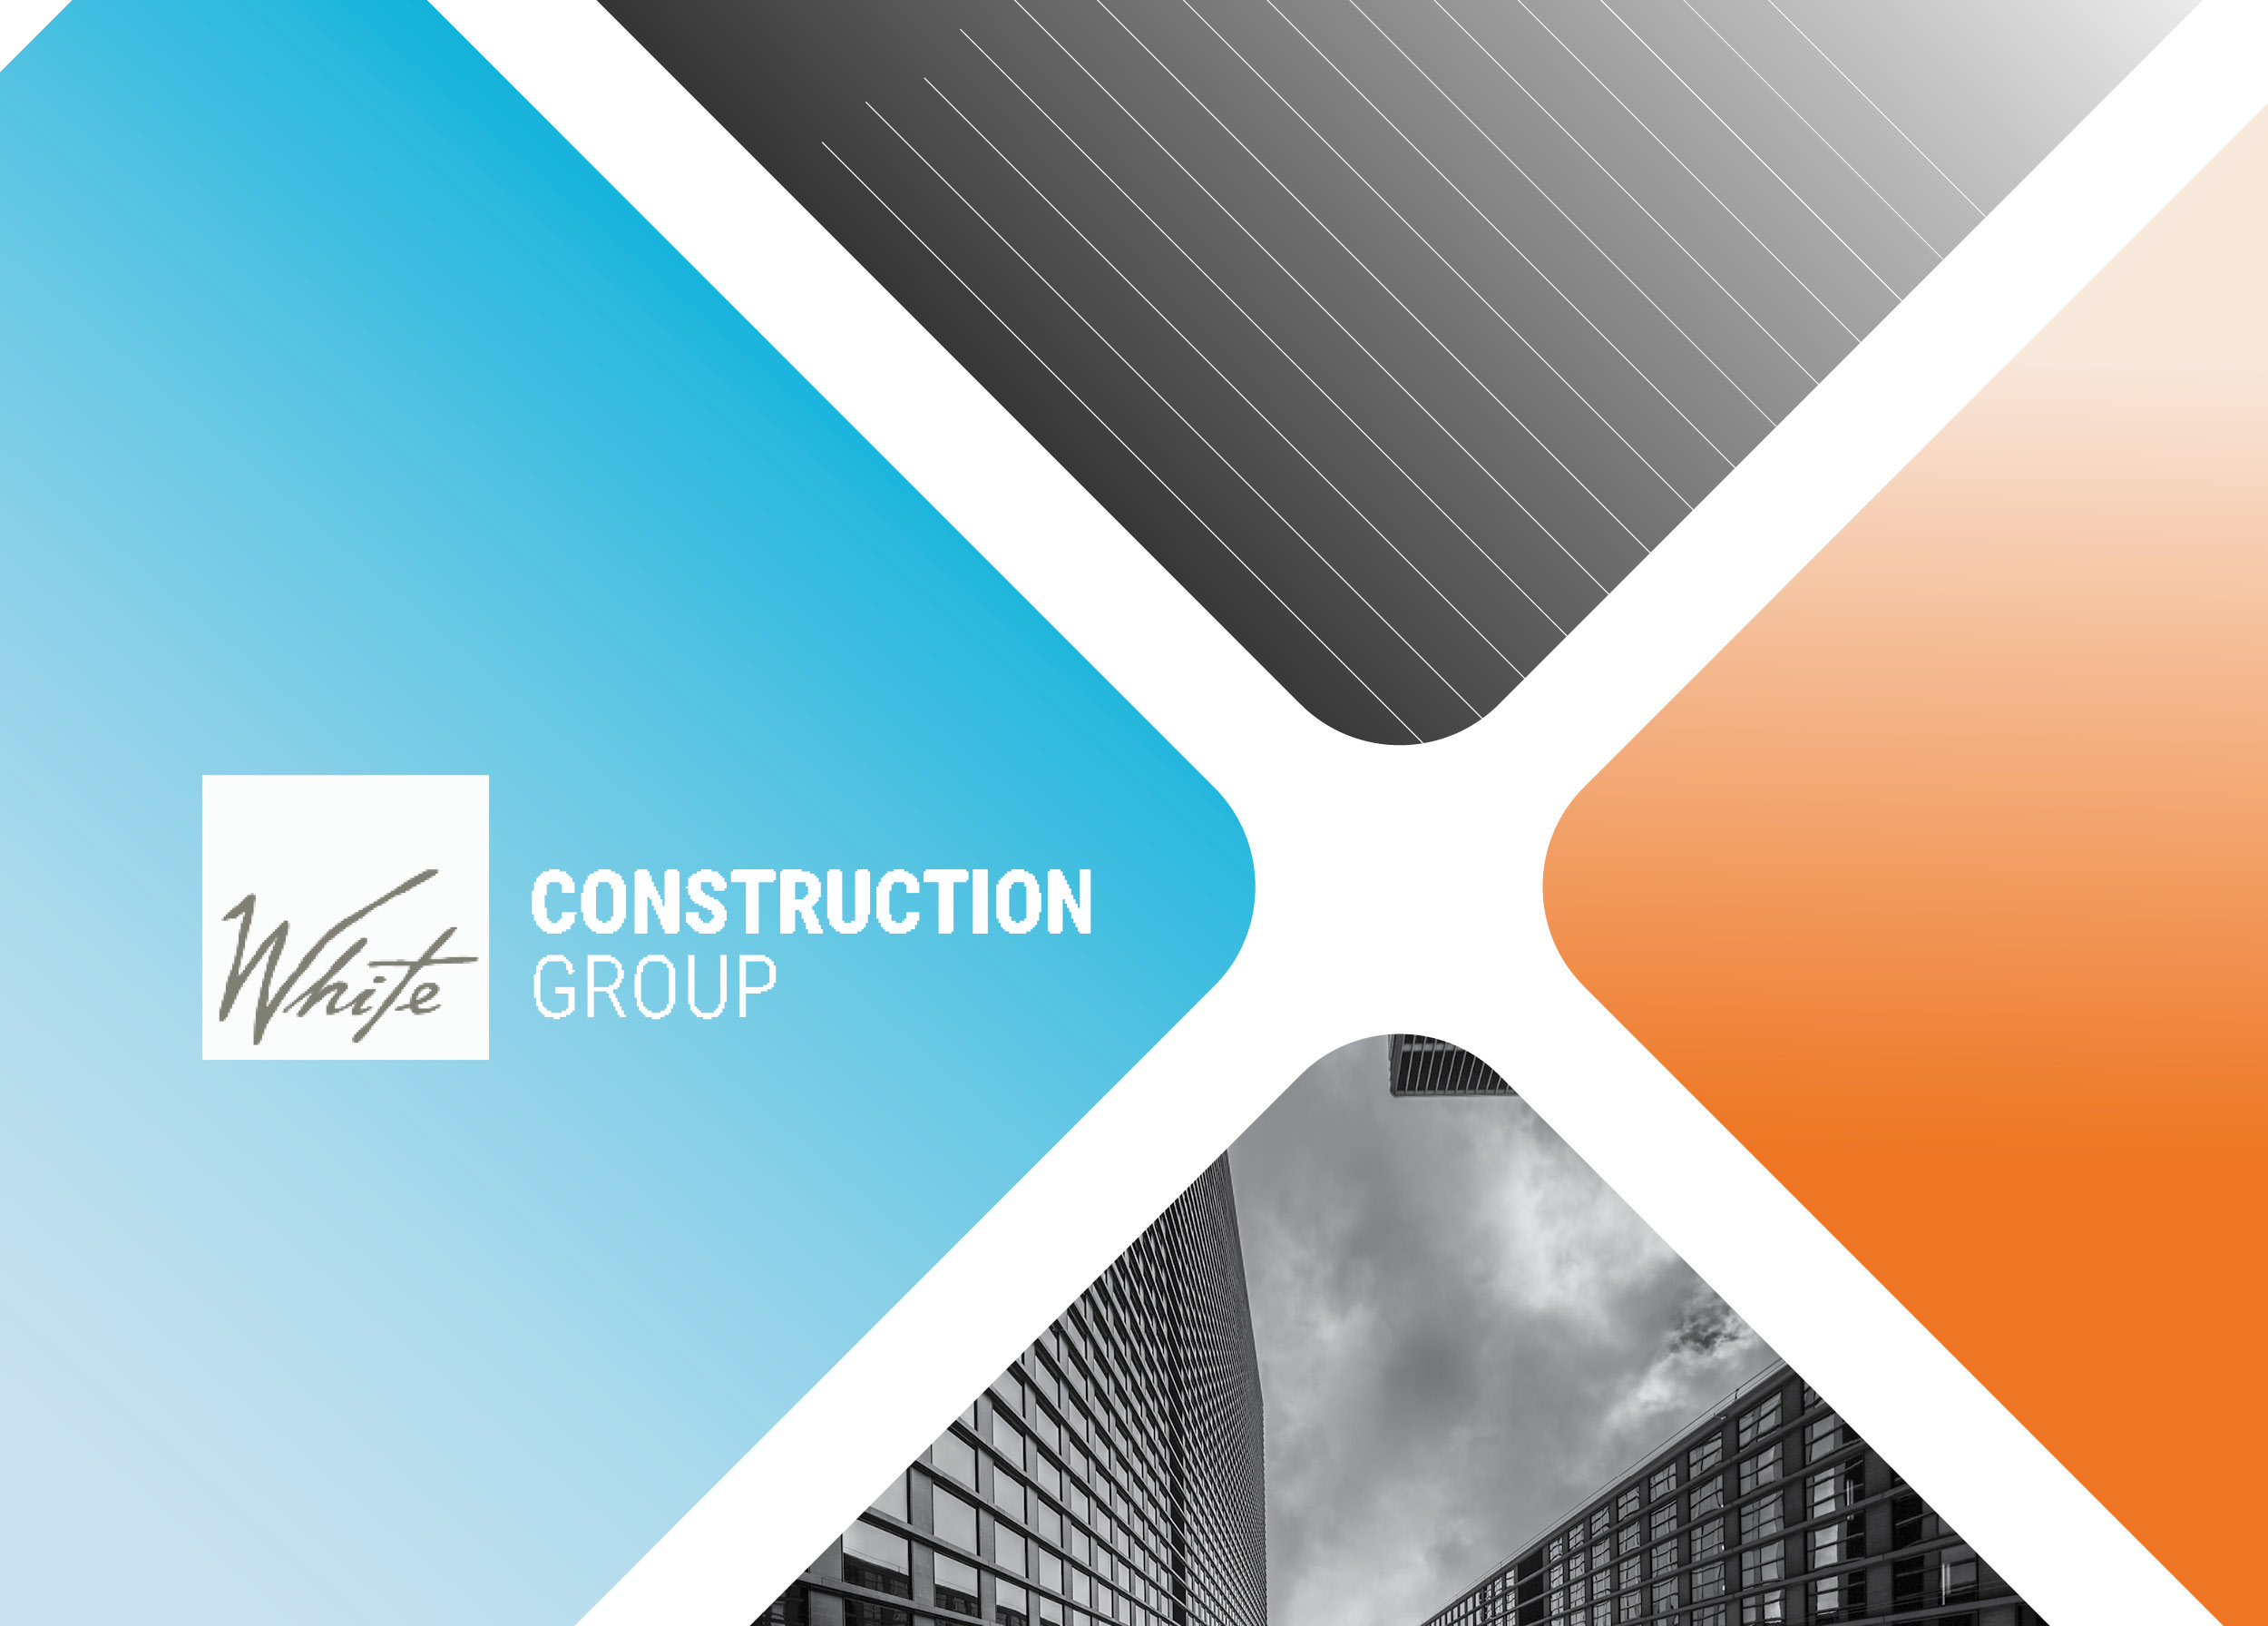 White Construction Group logo over colorful shapes